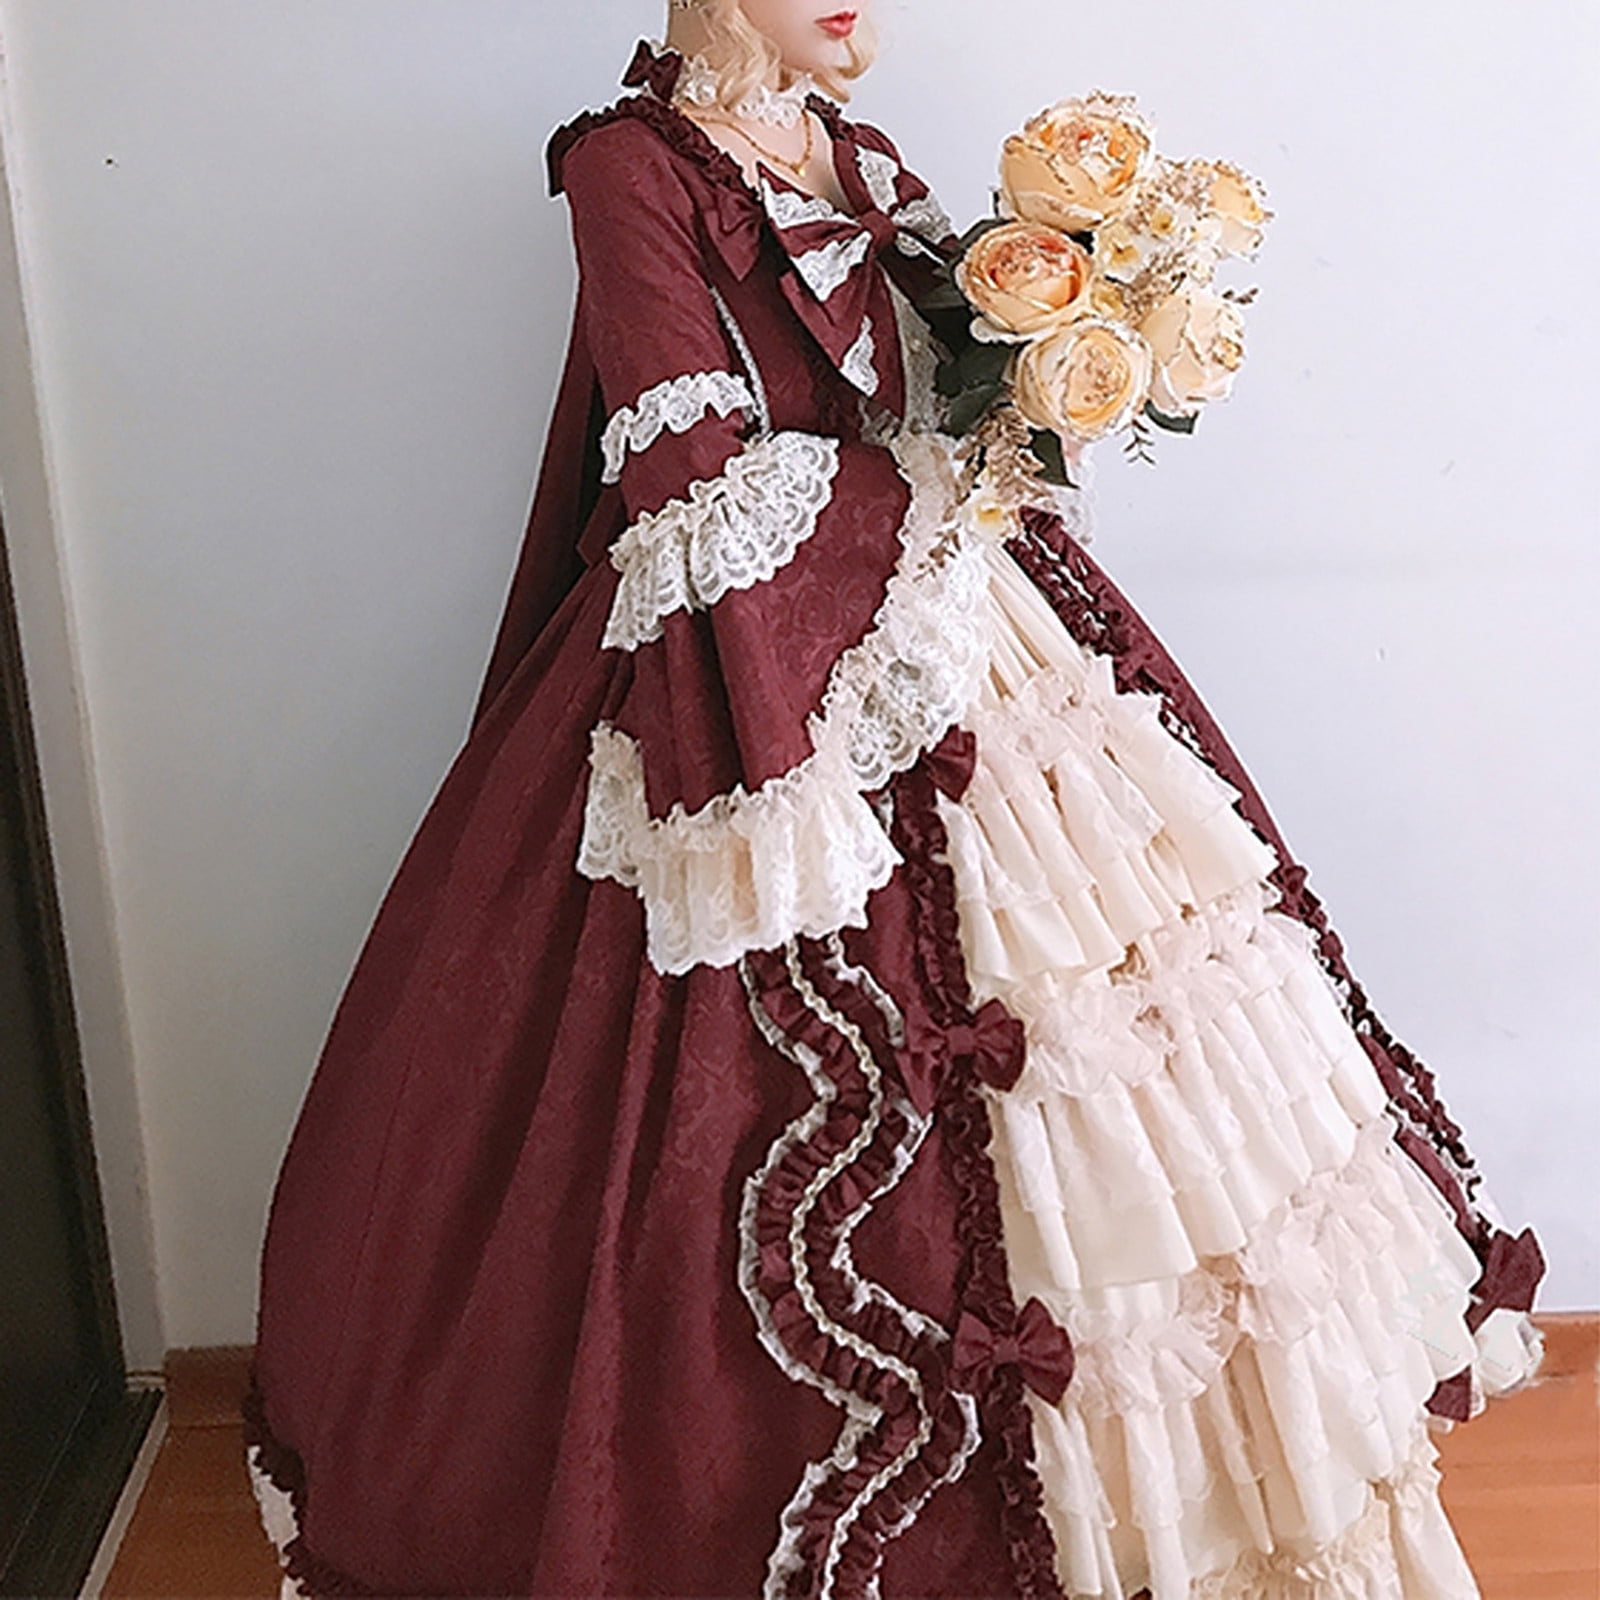 Victorian Dress Costume Royal Retro Costume Women's Victorian era Clothing Ball  Gown Jacquard Floral Green Ruffle Tiered Vintage Princess Costume Halloween  - Costumeslive.com